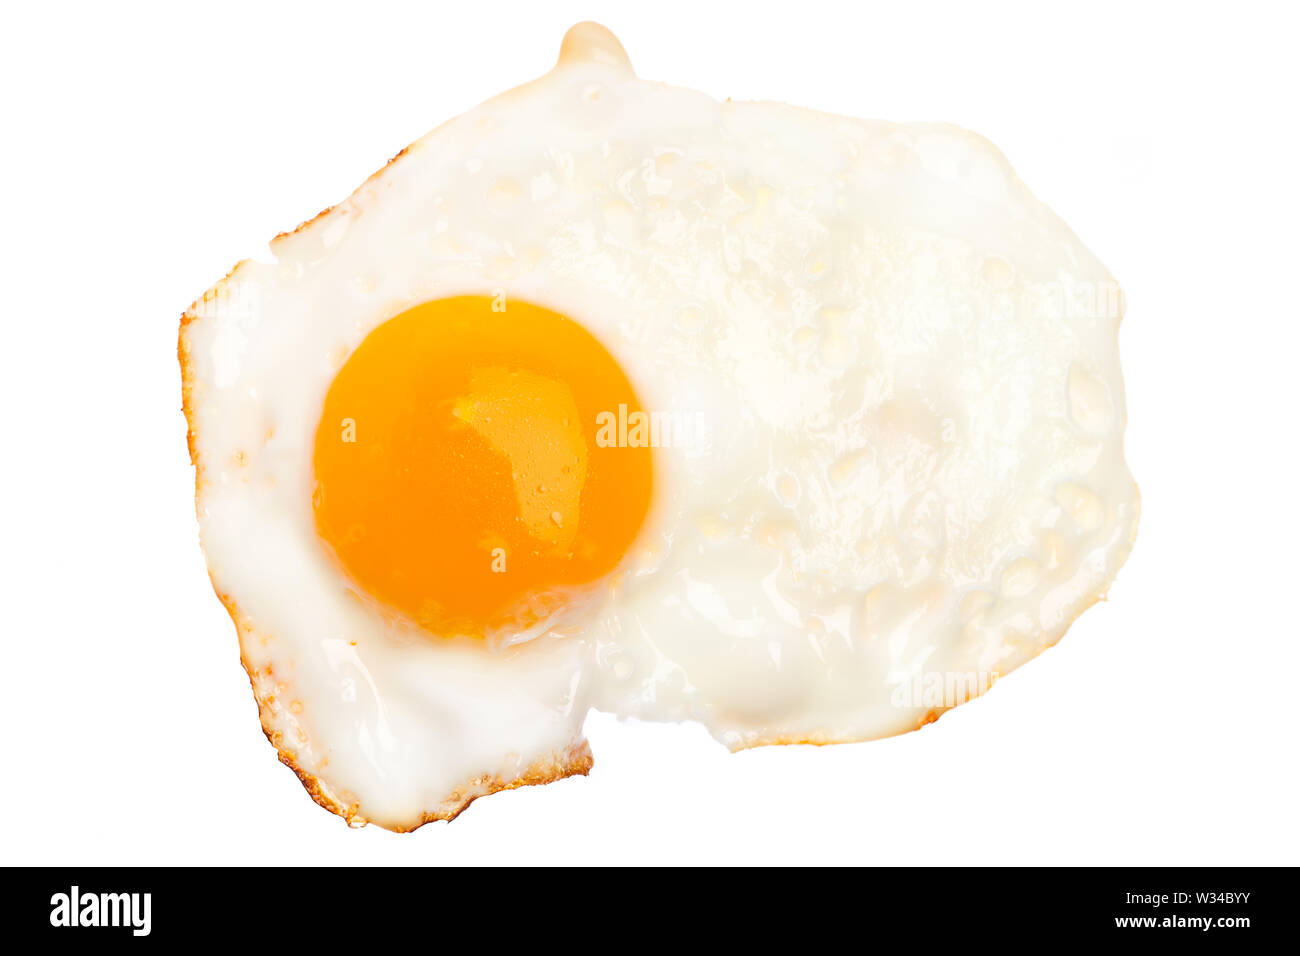 A fried egg isolated on white background Stock Photo